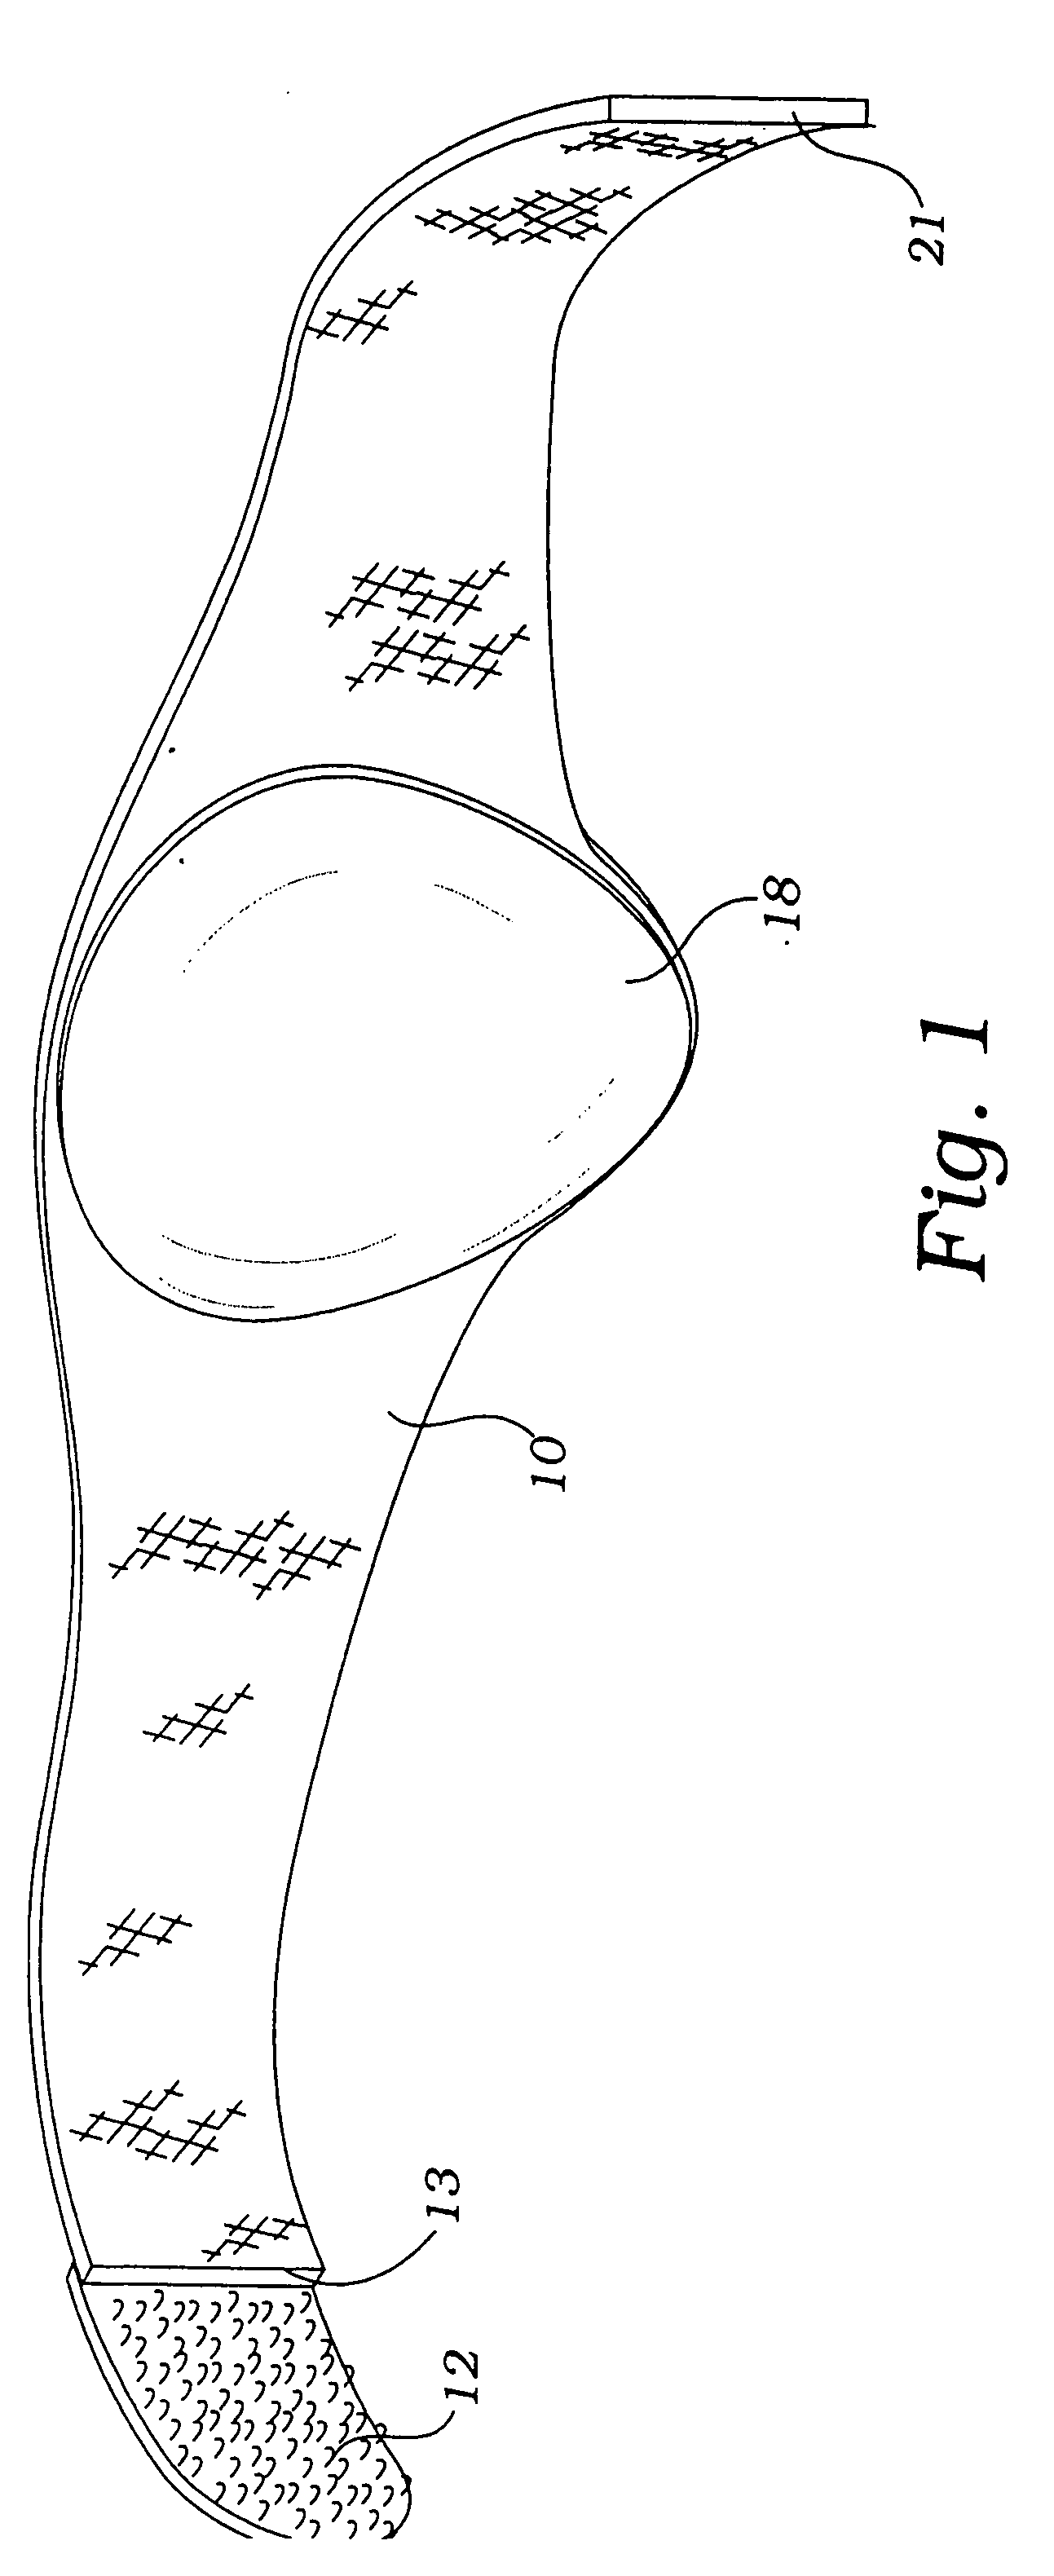 Device for foot stabilization